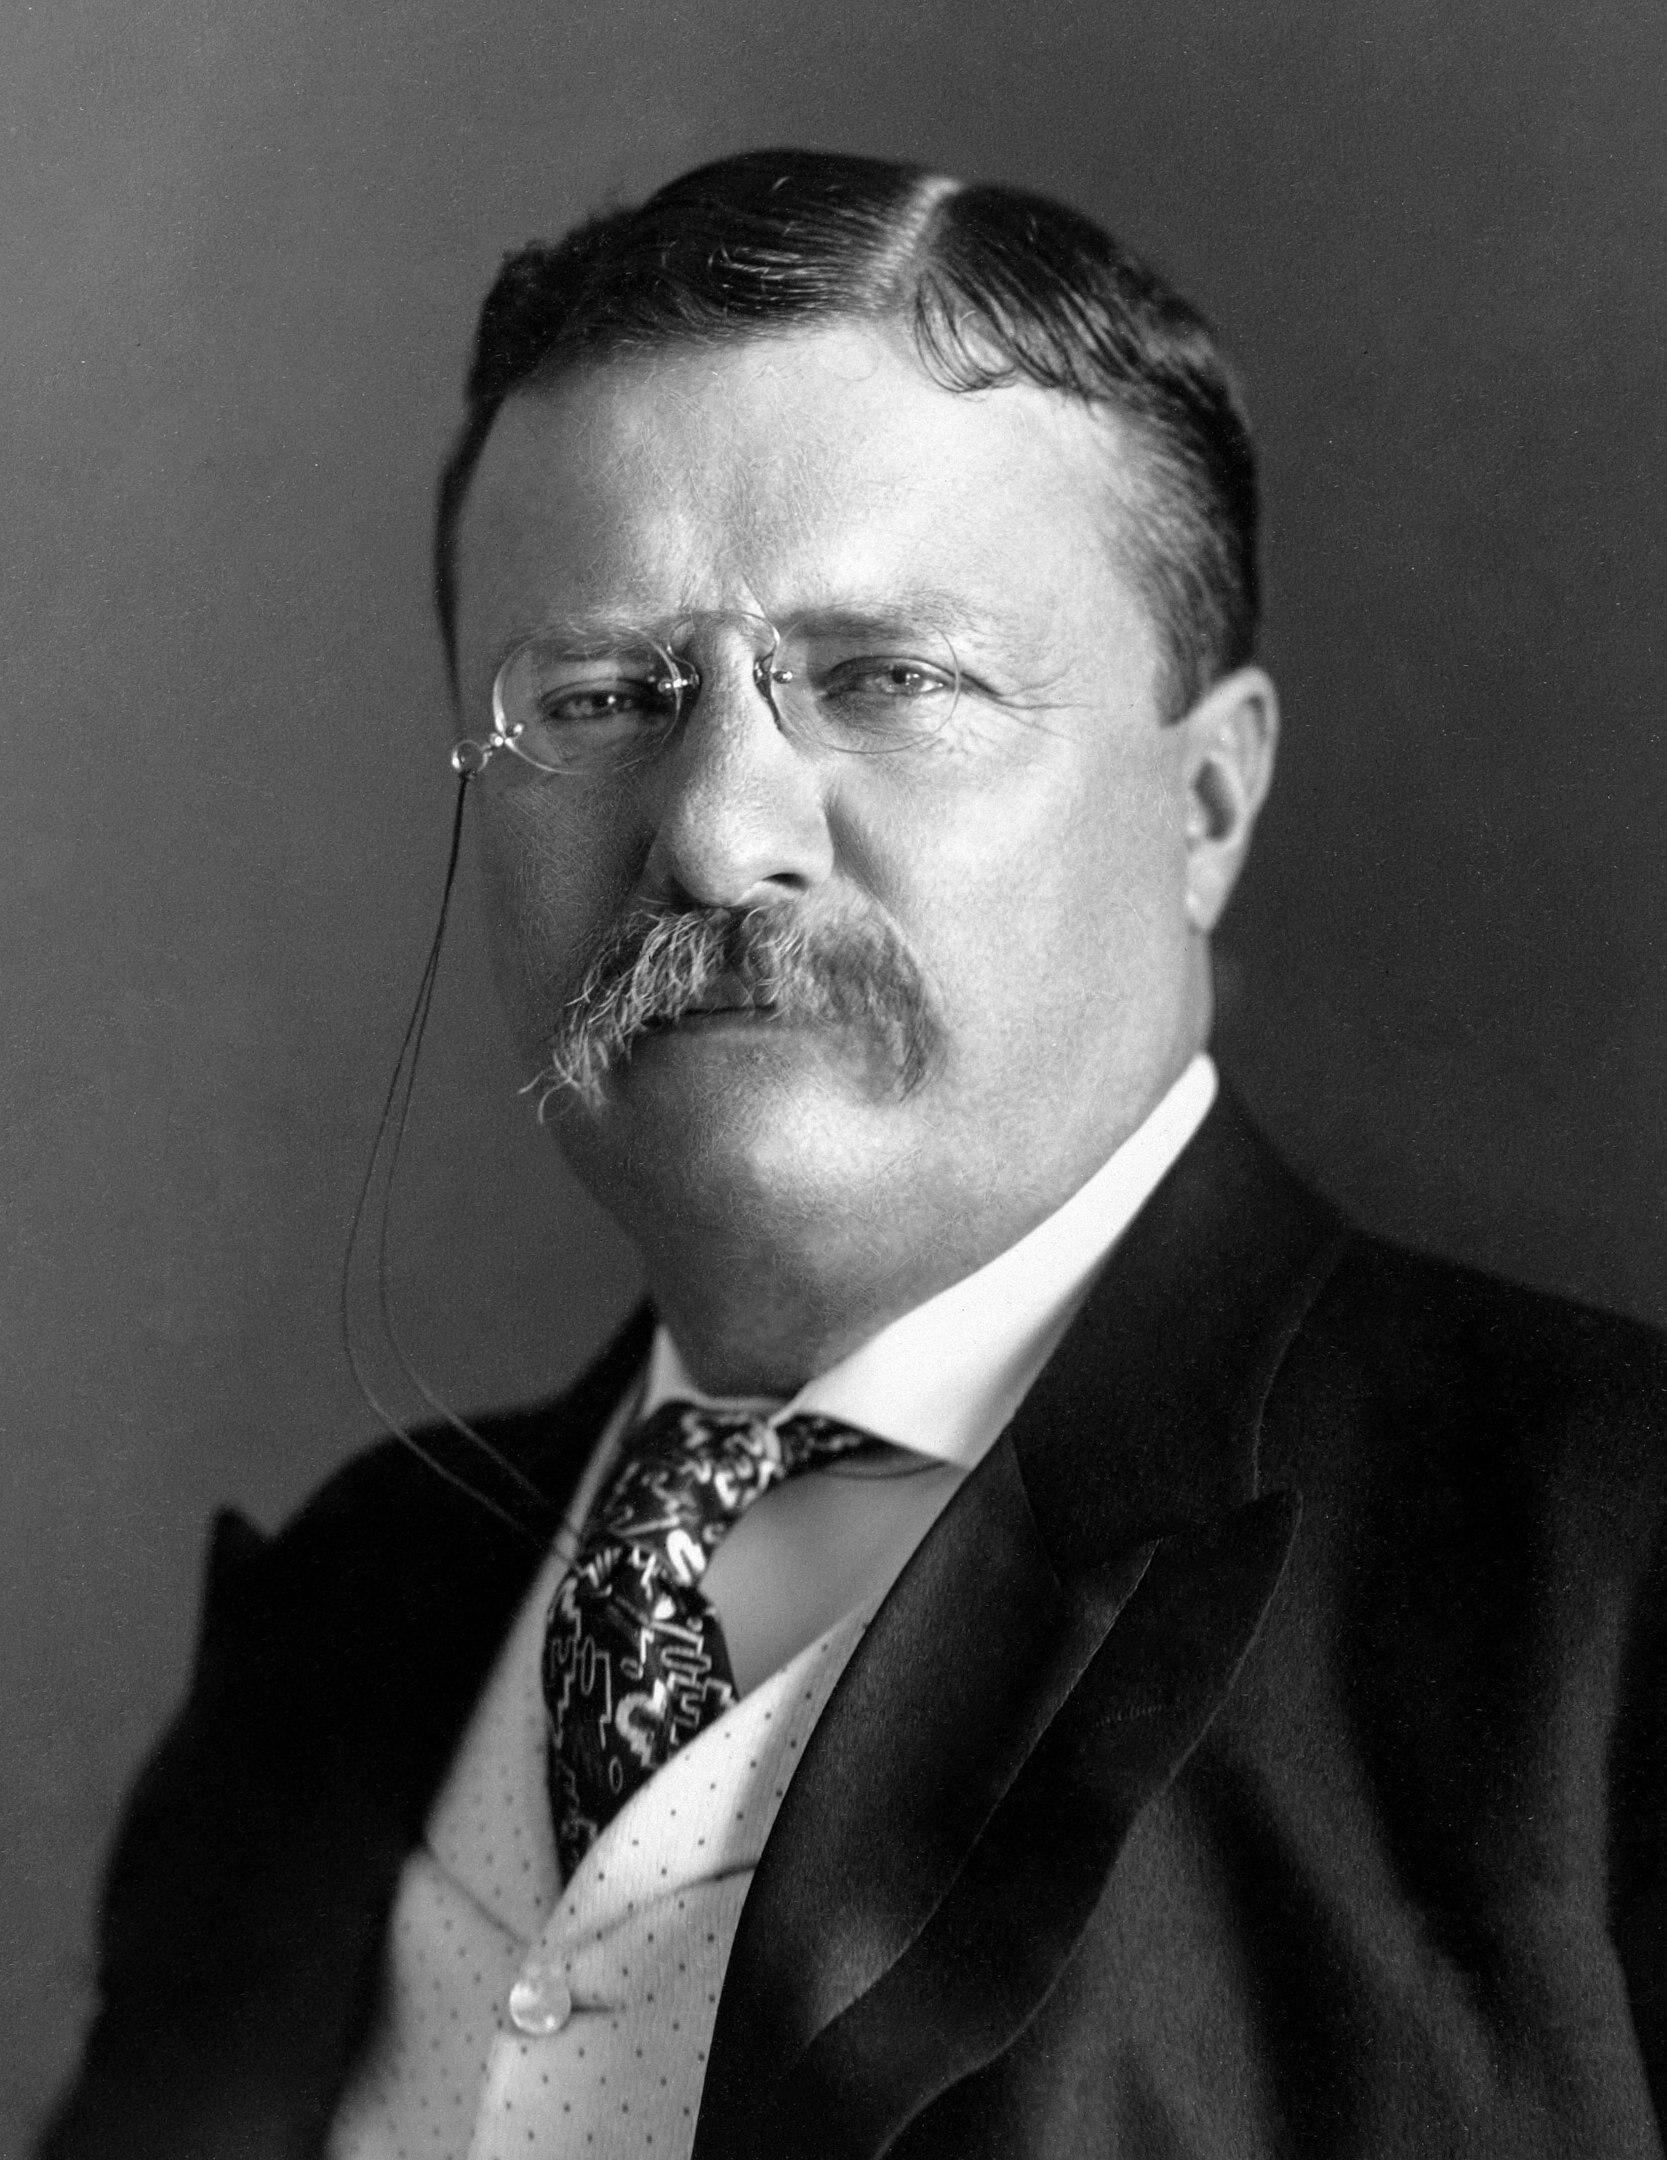 Theodore RooseveltBy Pach Bros. - This image is available from the United States Library of Congress&amp;#039;s Prints and Photographs divisionunder the digital ID ppmsca.35645.This tag does not indicate the copyright status of the attached work. A …